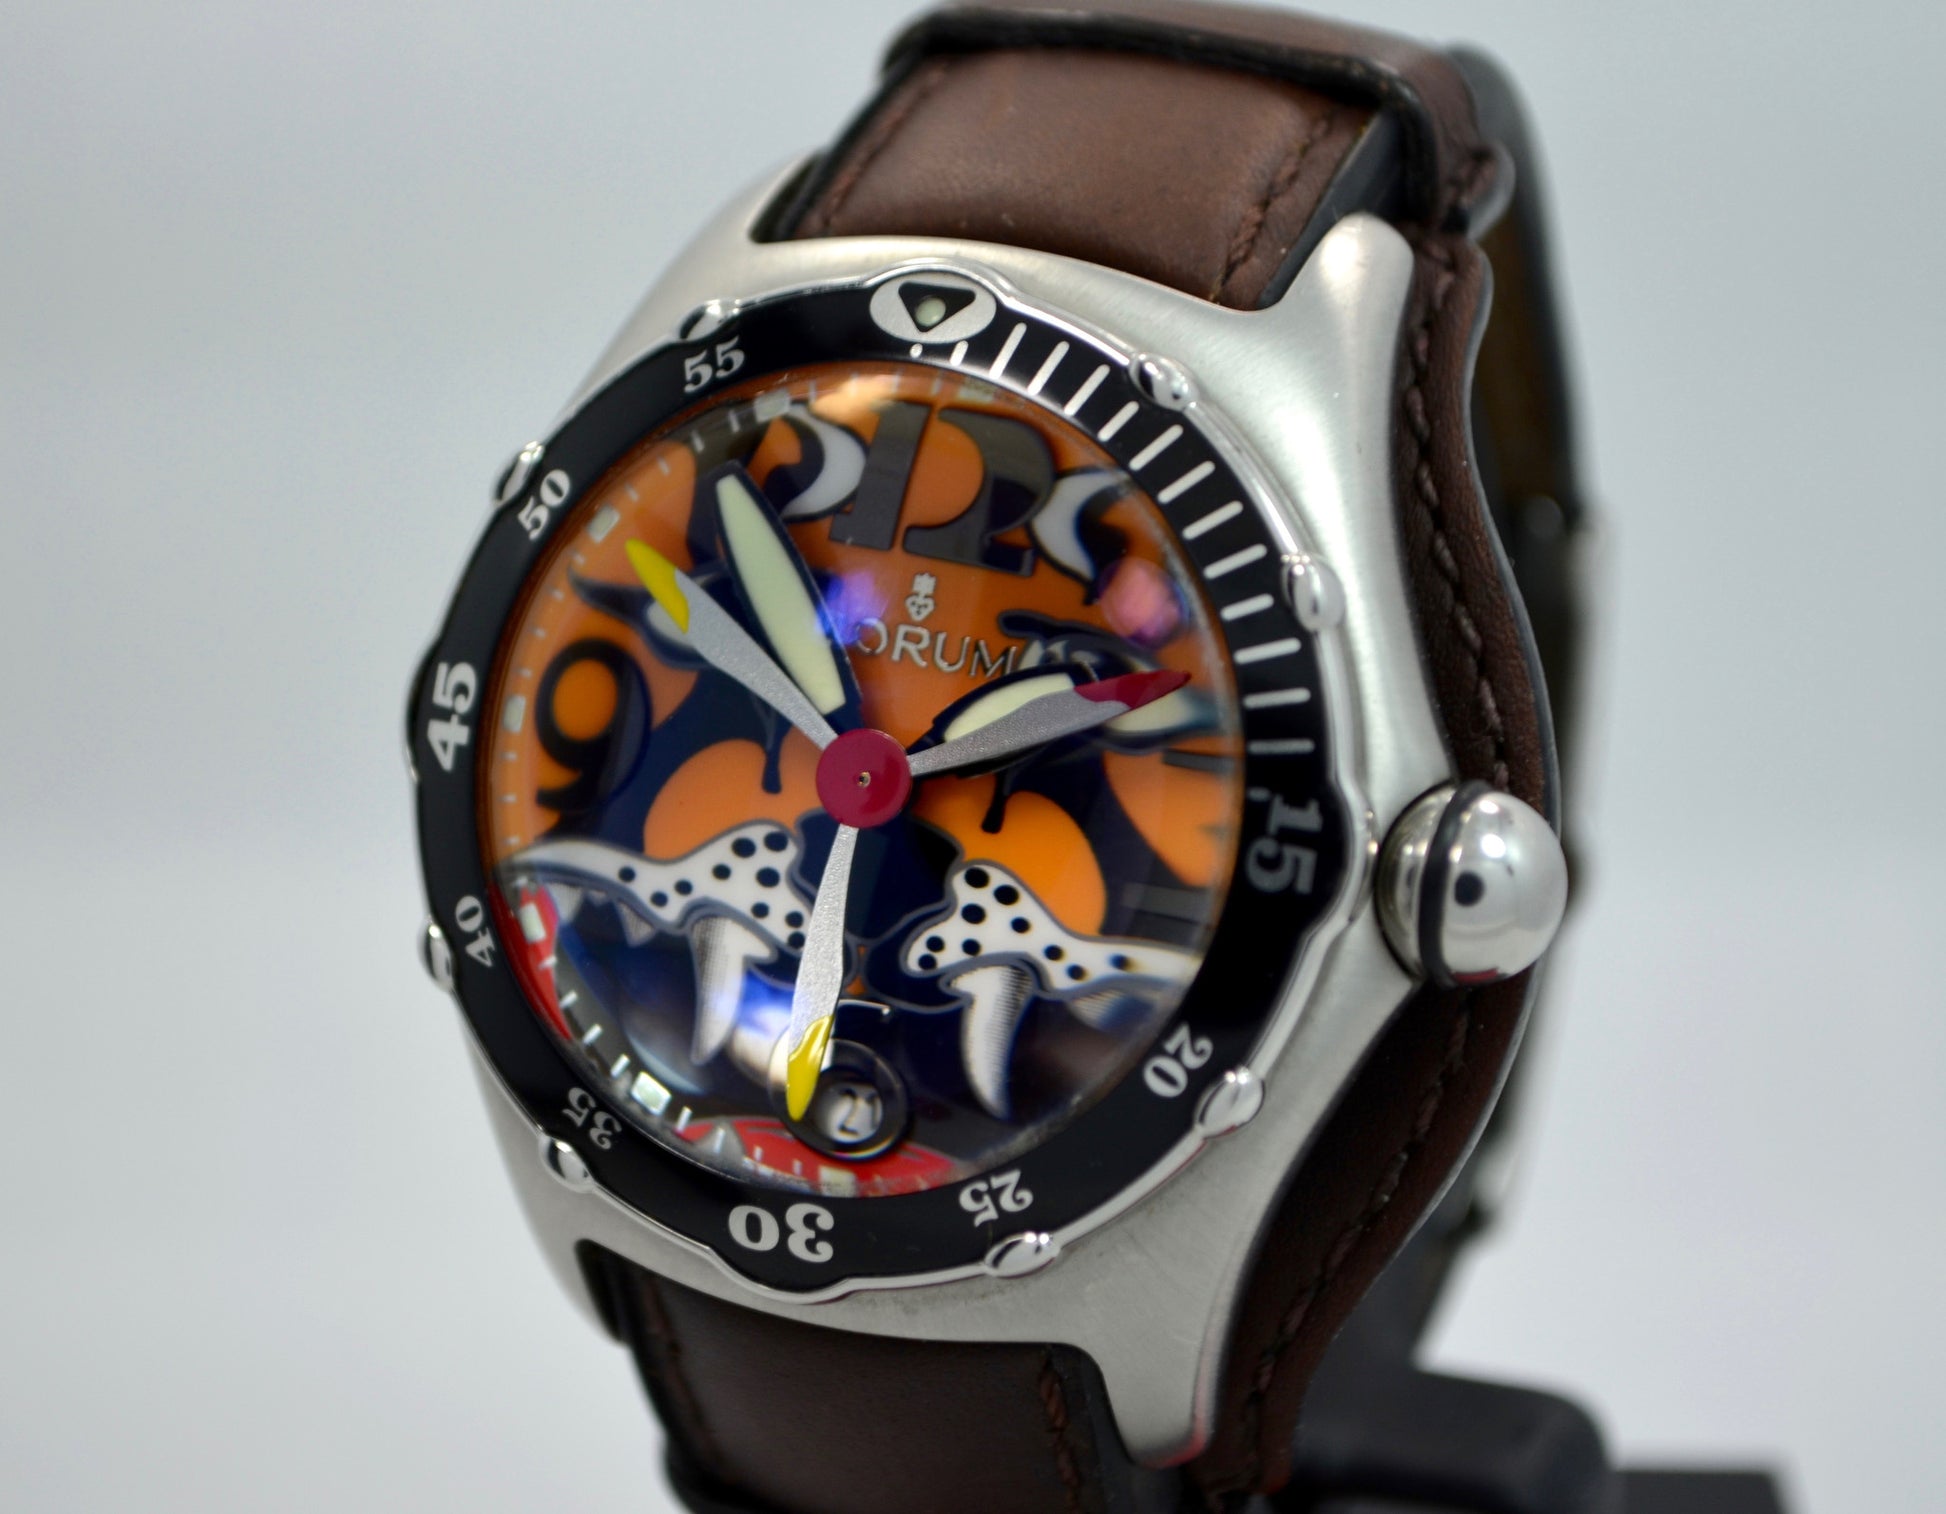 CORUM BUBBLE DIVE BOMBER TIGER AUTOMATIC LIMITED EDITION 82.180.20 2004 WATCH - Hashtag Watch Company